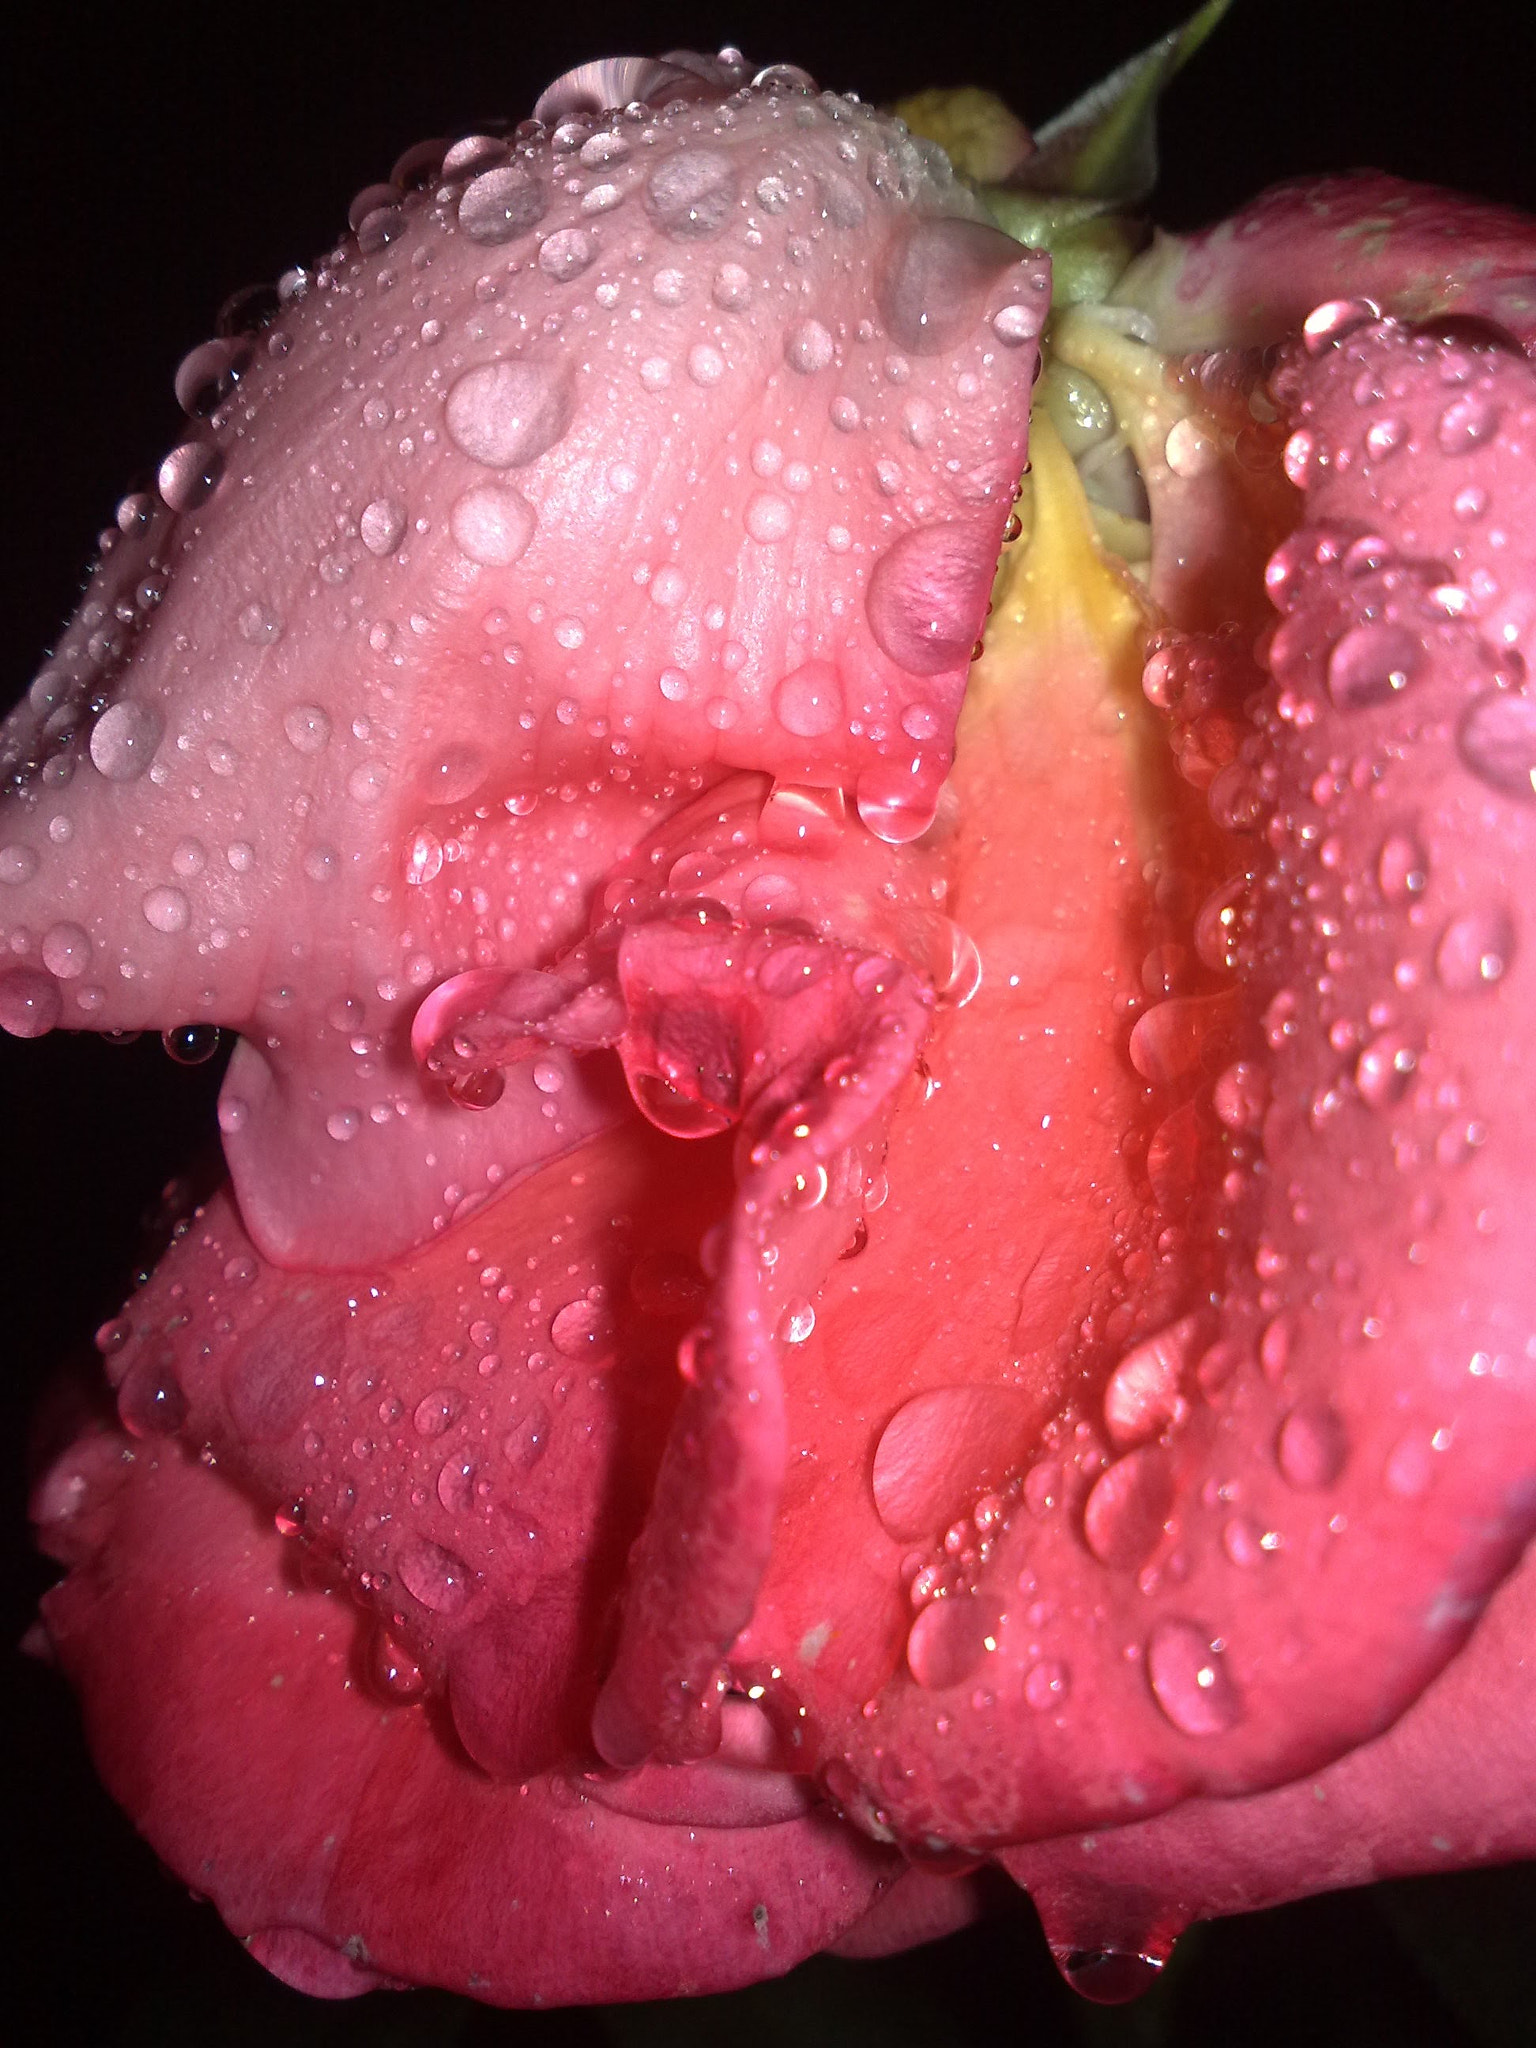 Nokia N82 sample photo. Raindrops on the rose photography